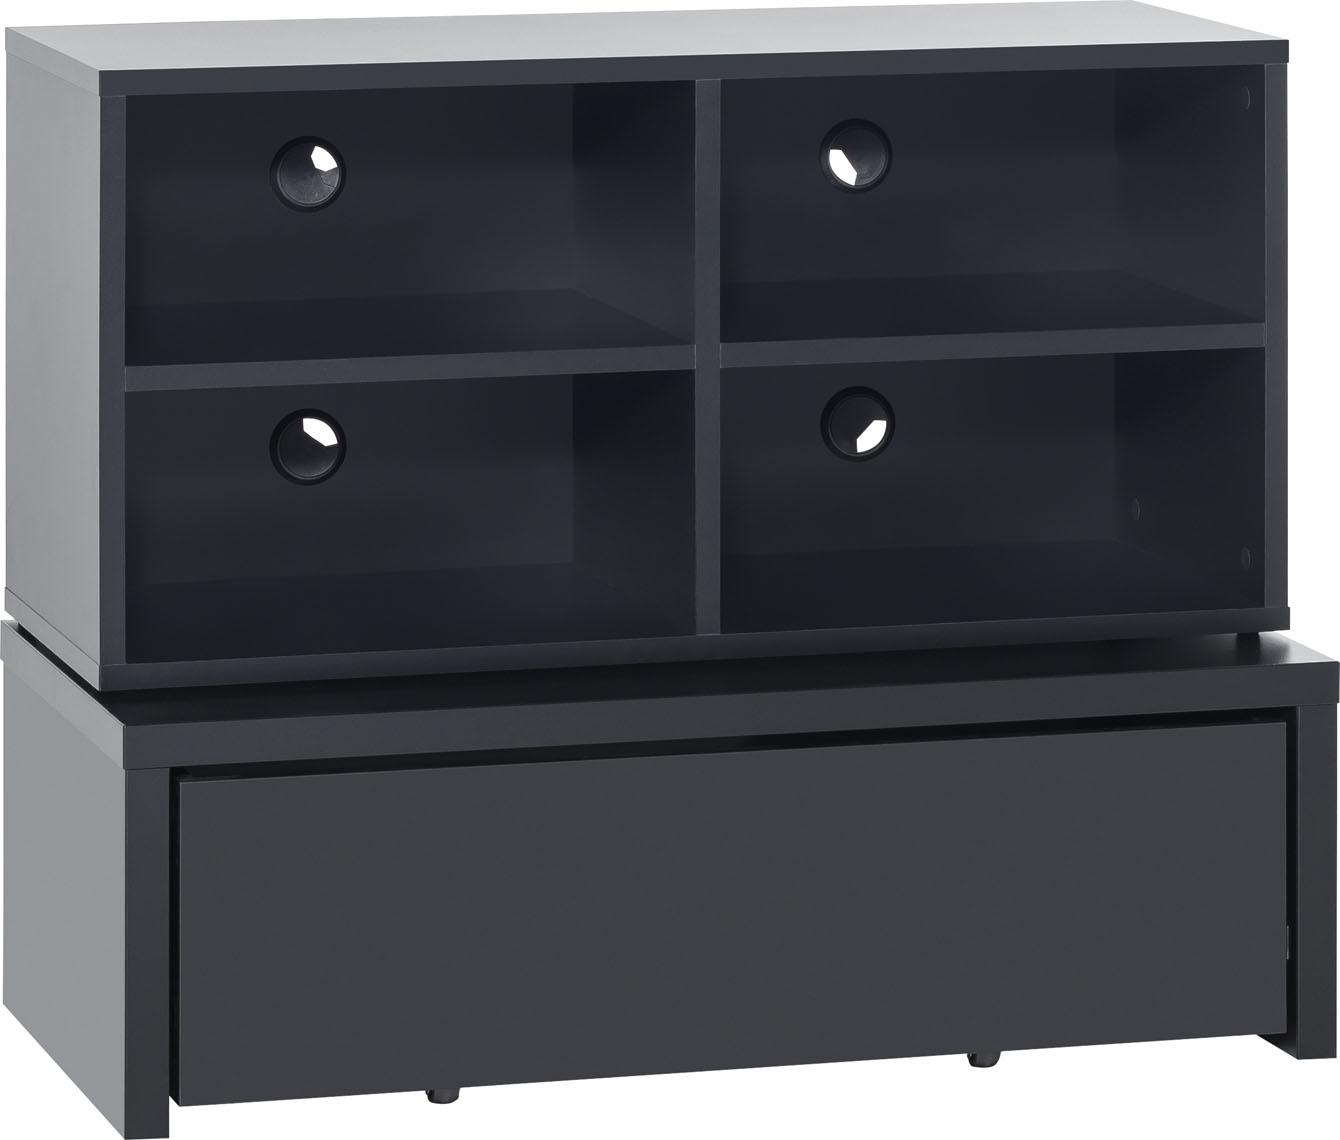 TV unit with base 106x53 and drawer